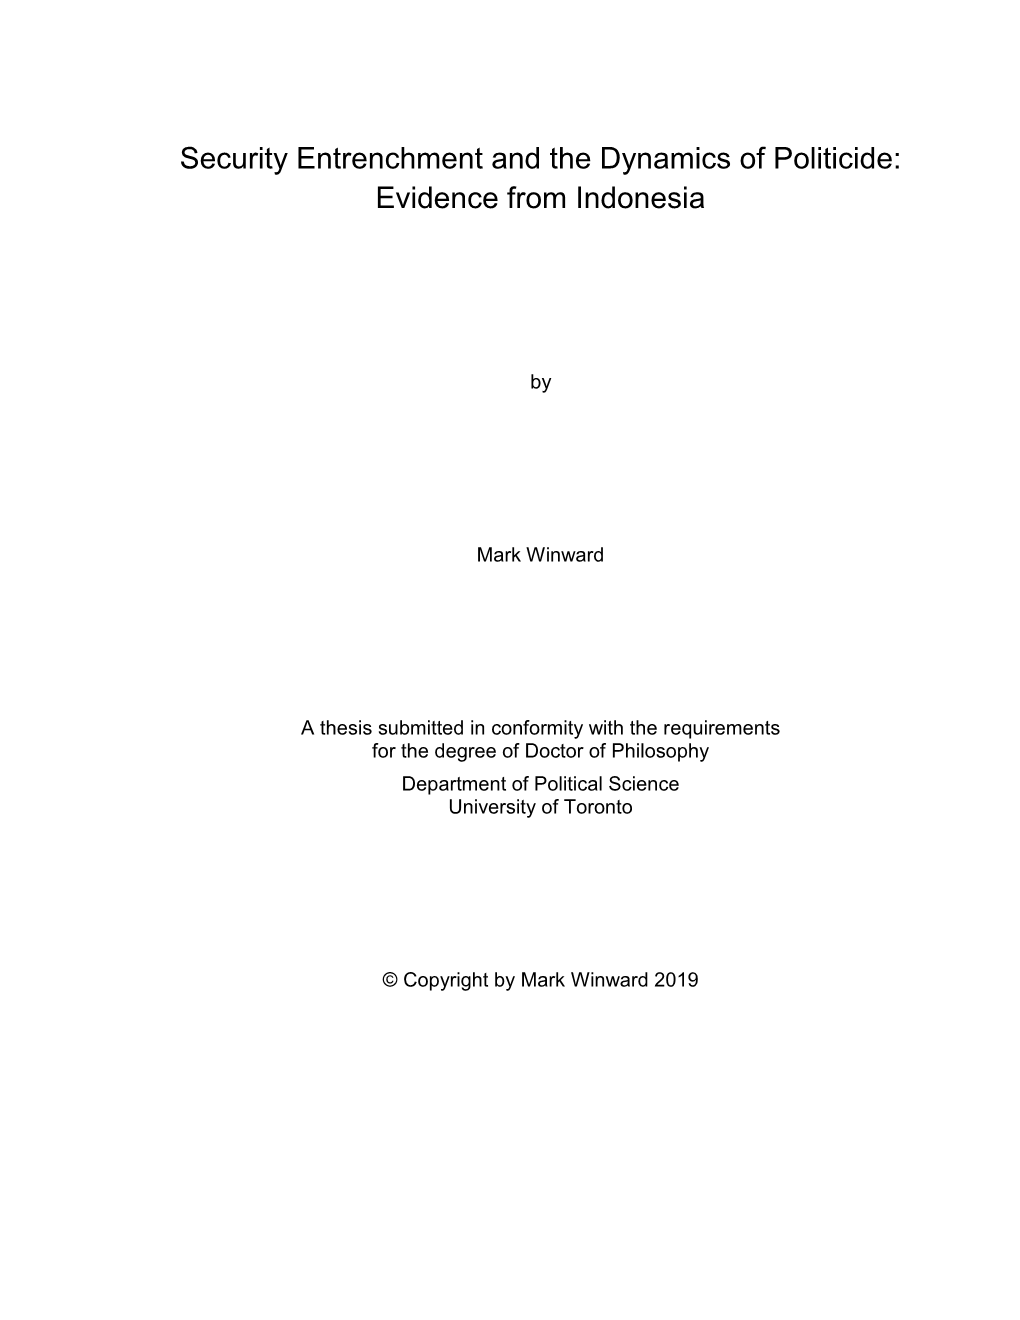 Security Entrenchment and the Dynamics of Politicide: Evidence from Indonesia